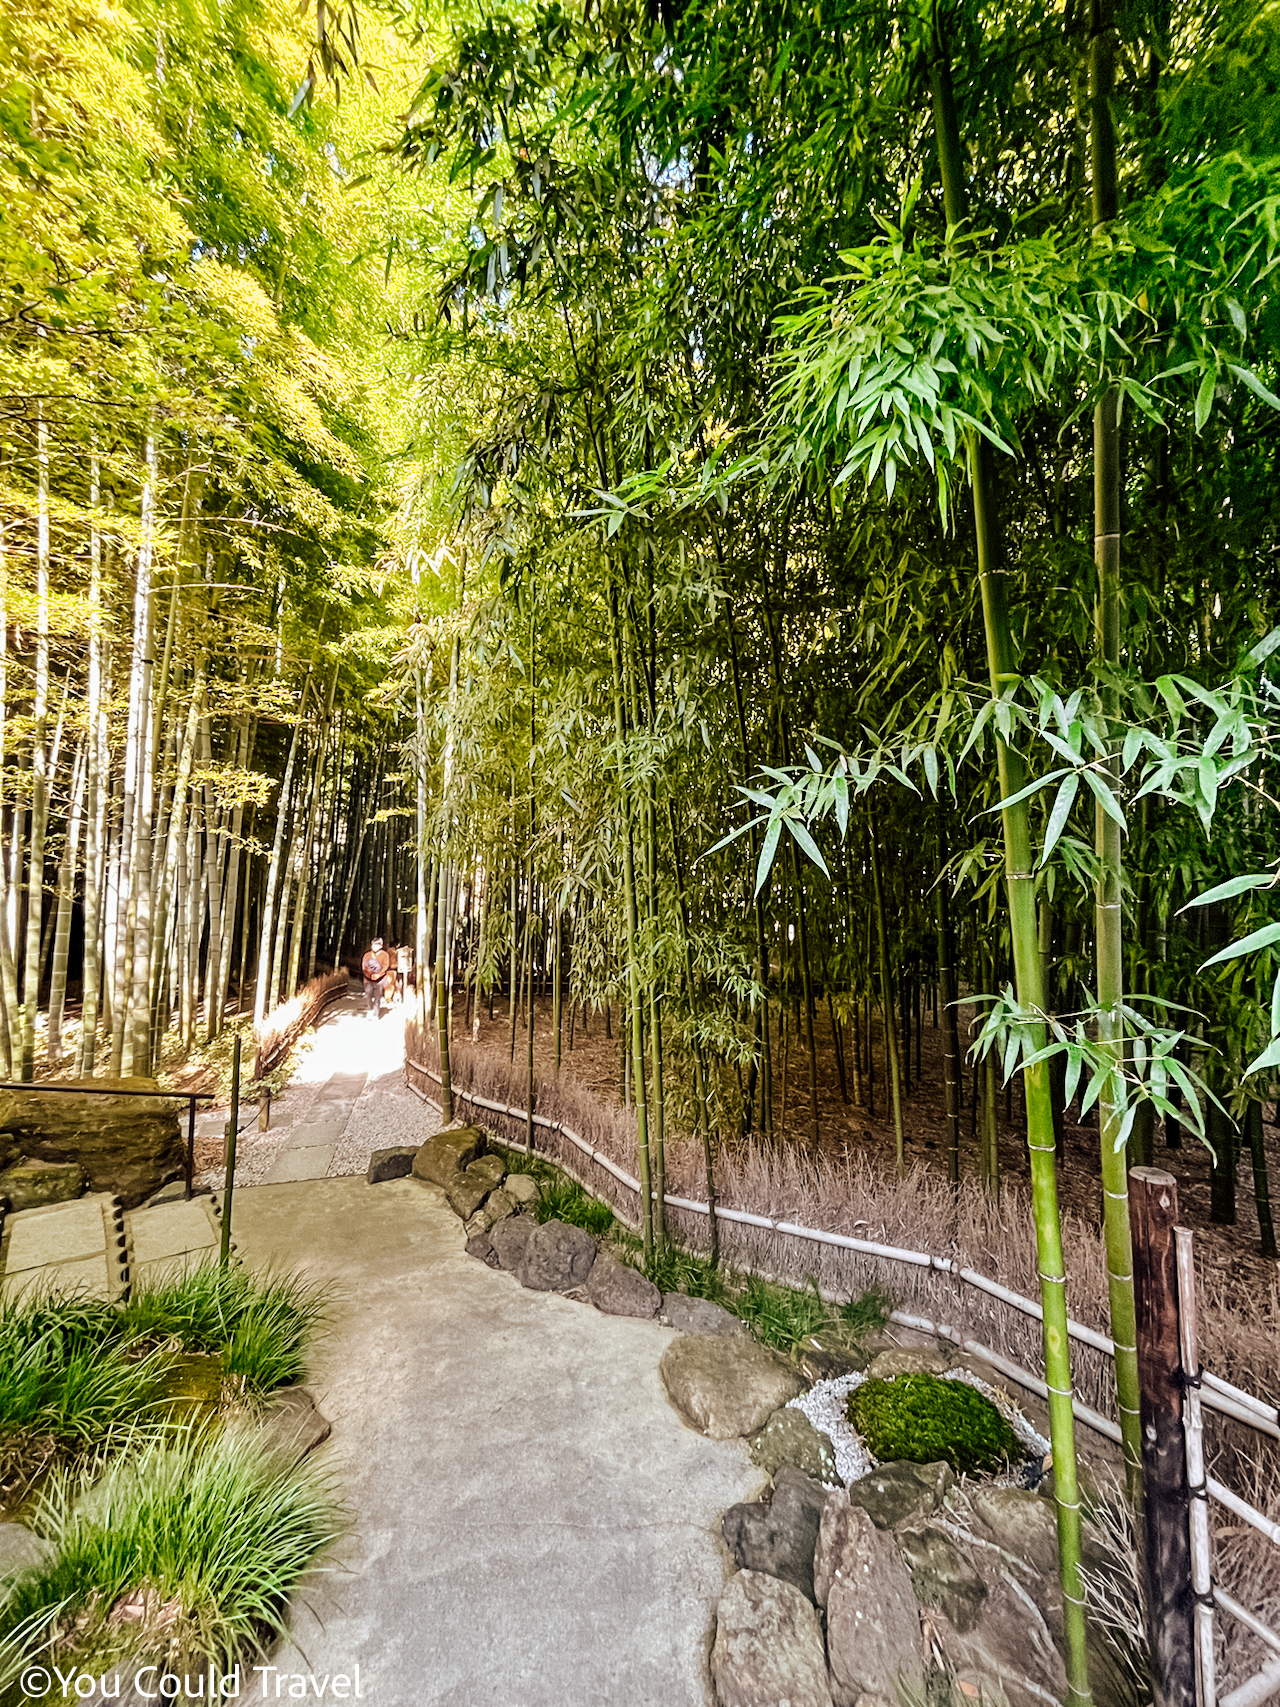 The bamboo forest at Hokokuji Temple